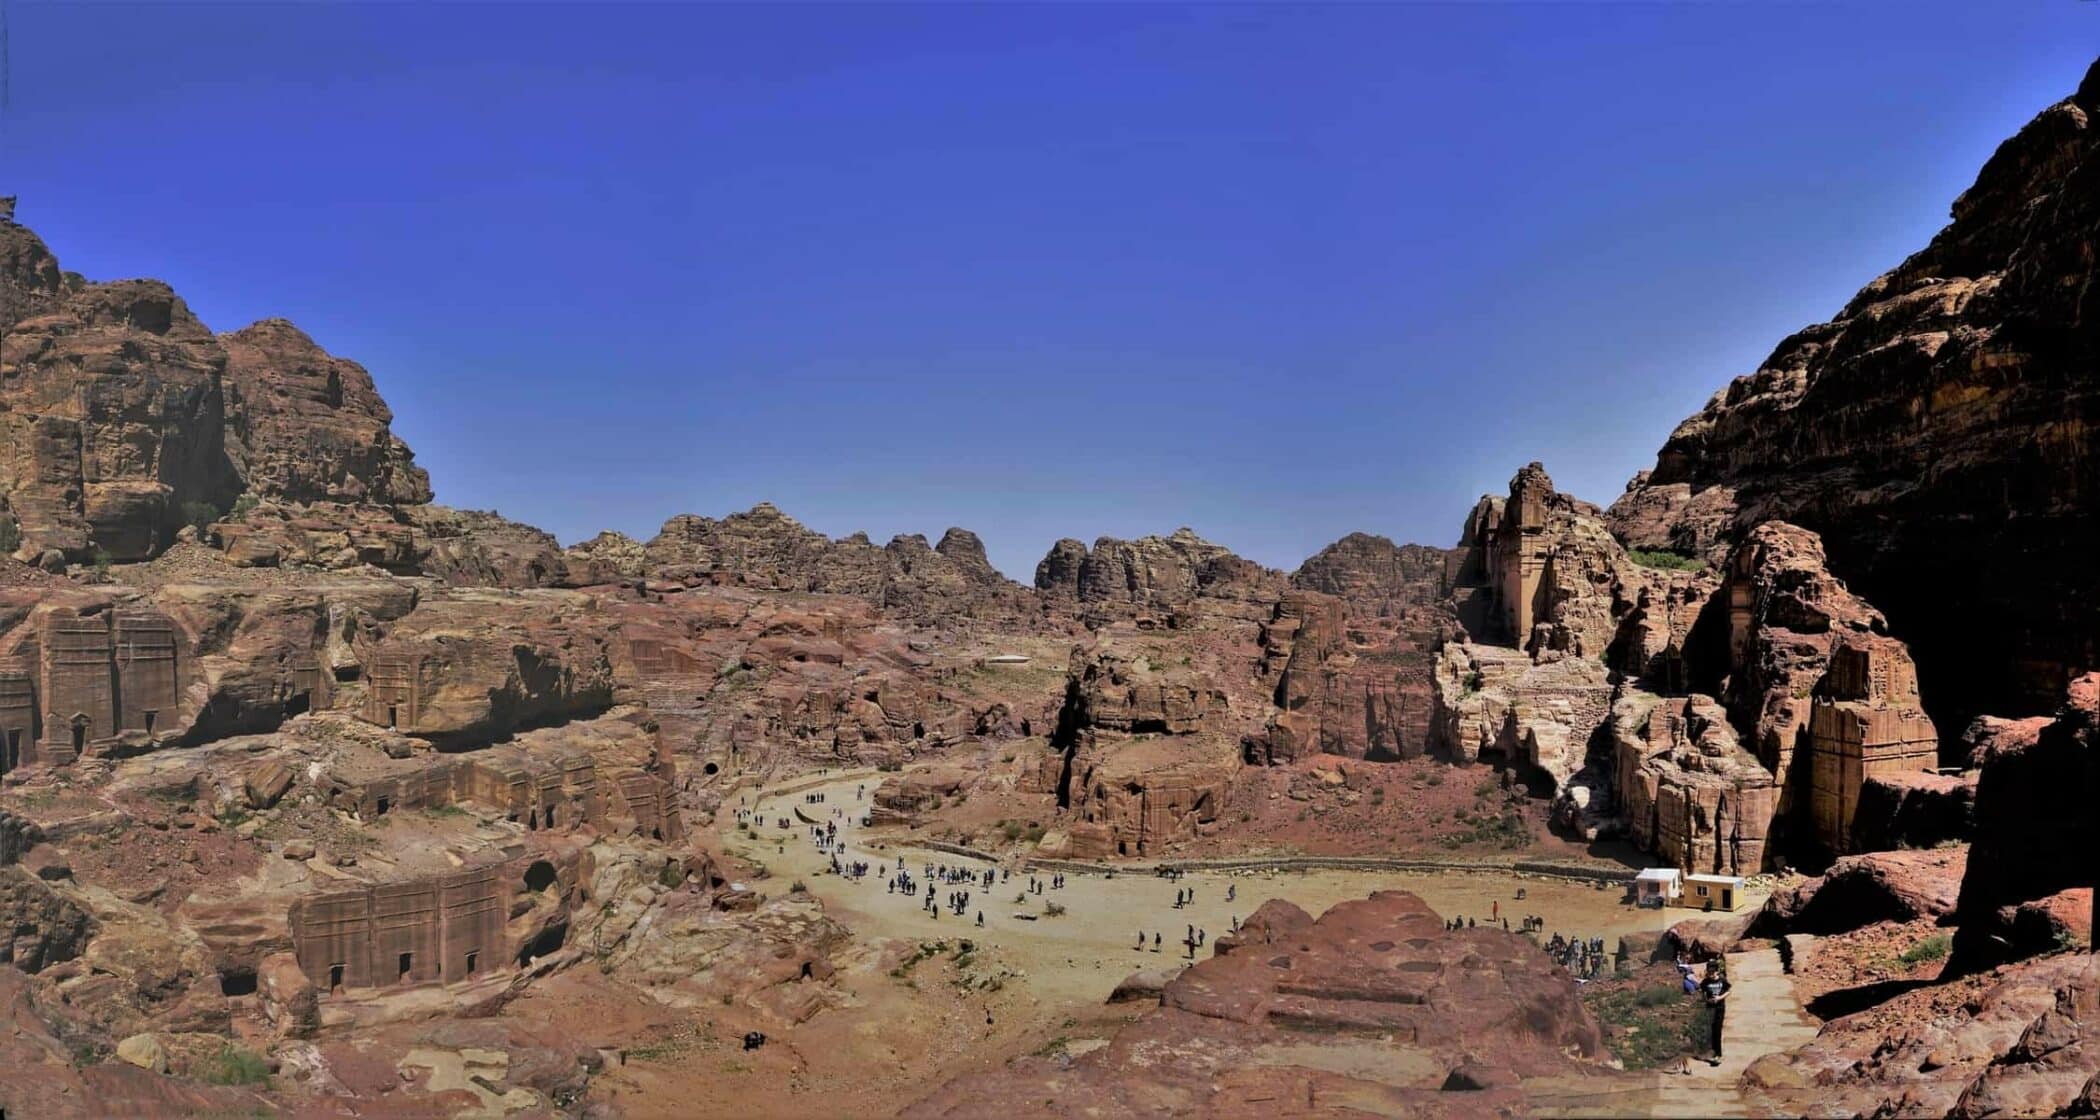 Panorama of ancient Petra, Jordan. This is the traditional route to the monasteries.